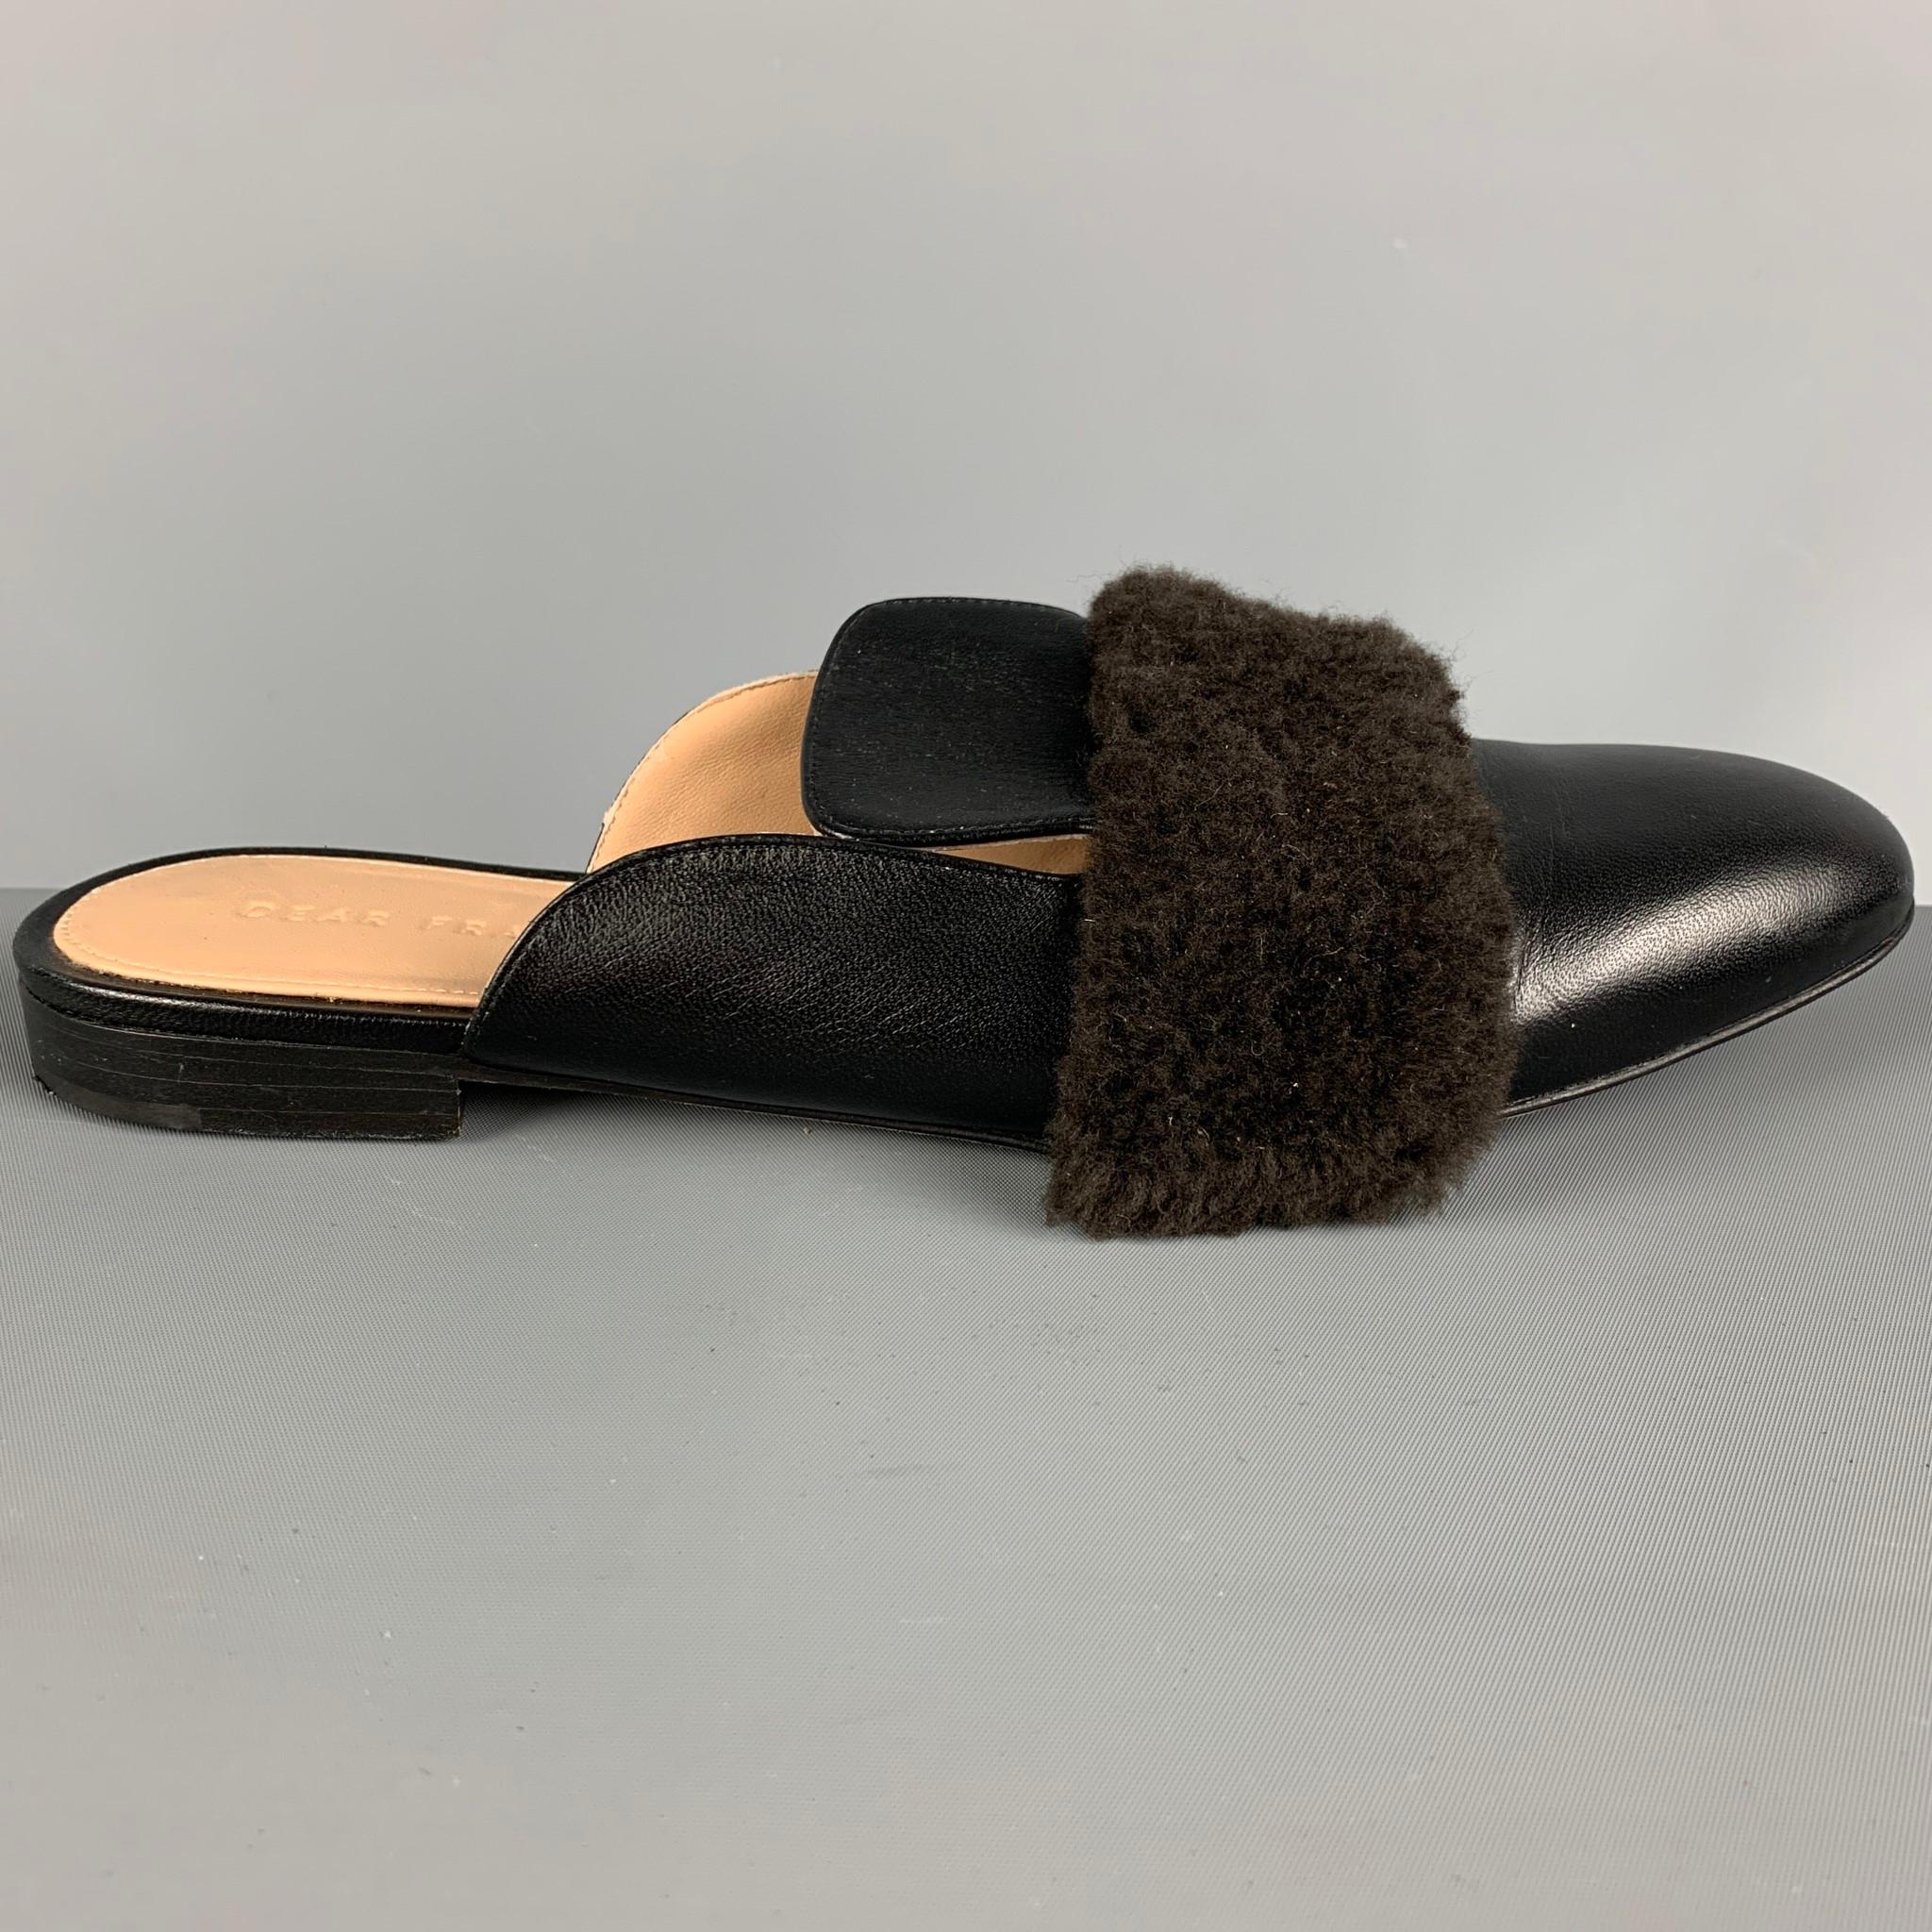 DEAR FRANCES flats comes in a black and brown leather featuring a mule style, round toe, shearling detail and a wooden sole. Made in Italy.

Very Good Pre-Owned Condition. Moderate Wear.
Marked: 38

Outsole:

10.5 in. x 3 in.
 

 

SKU: